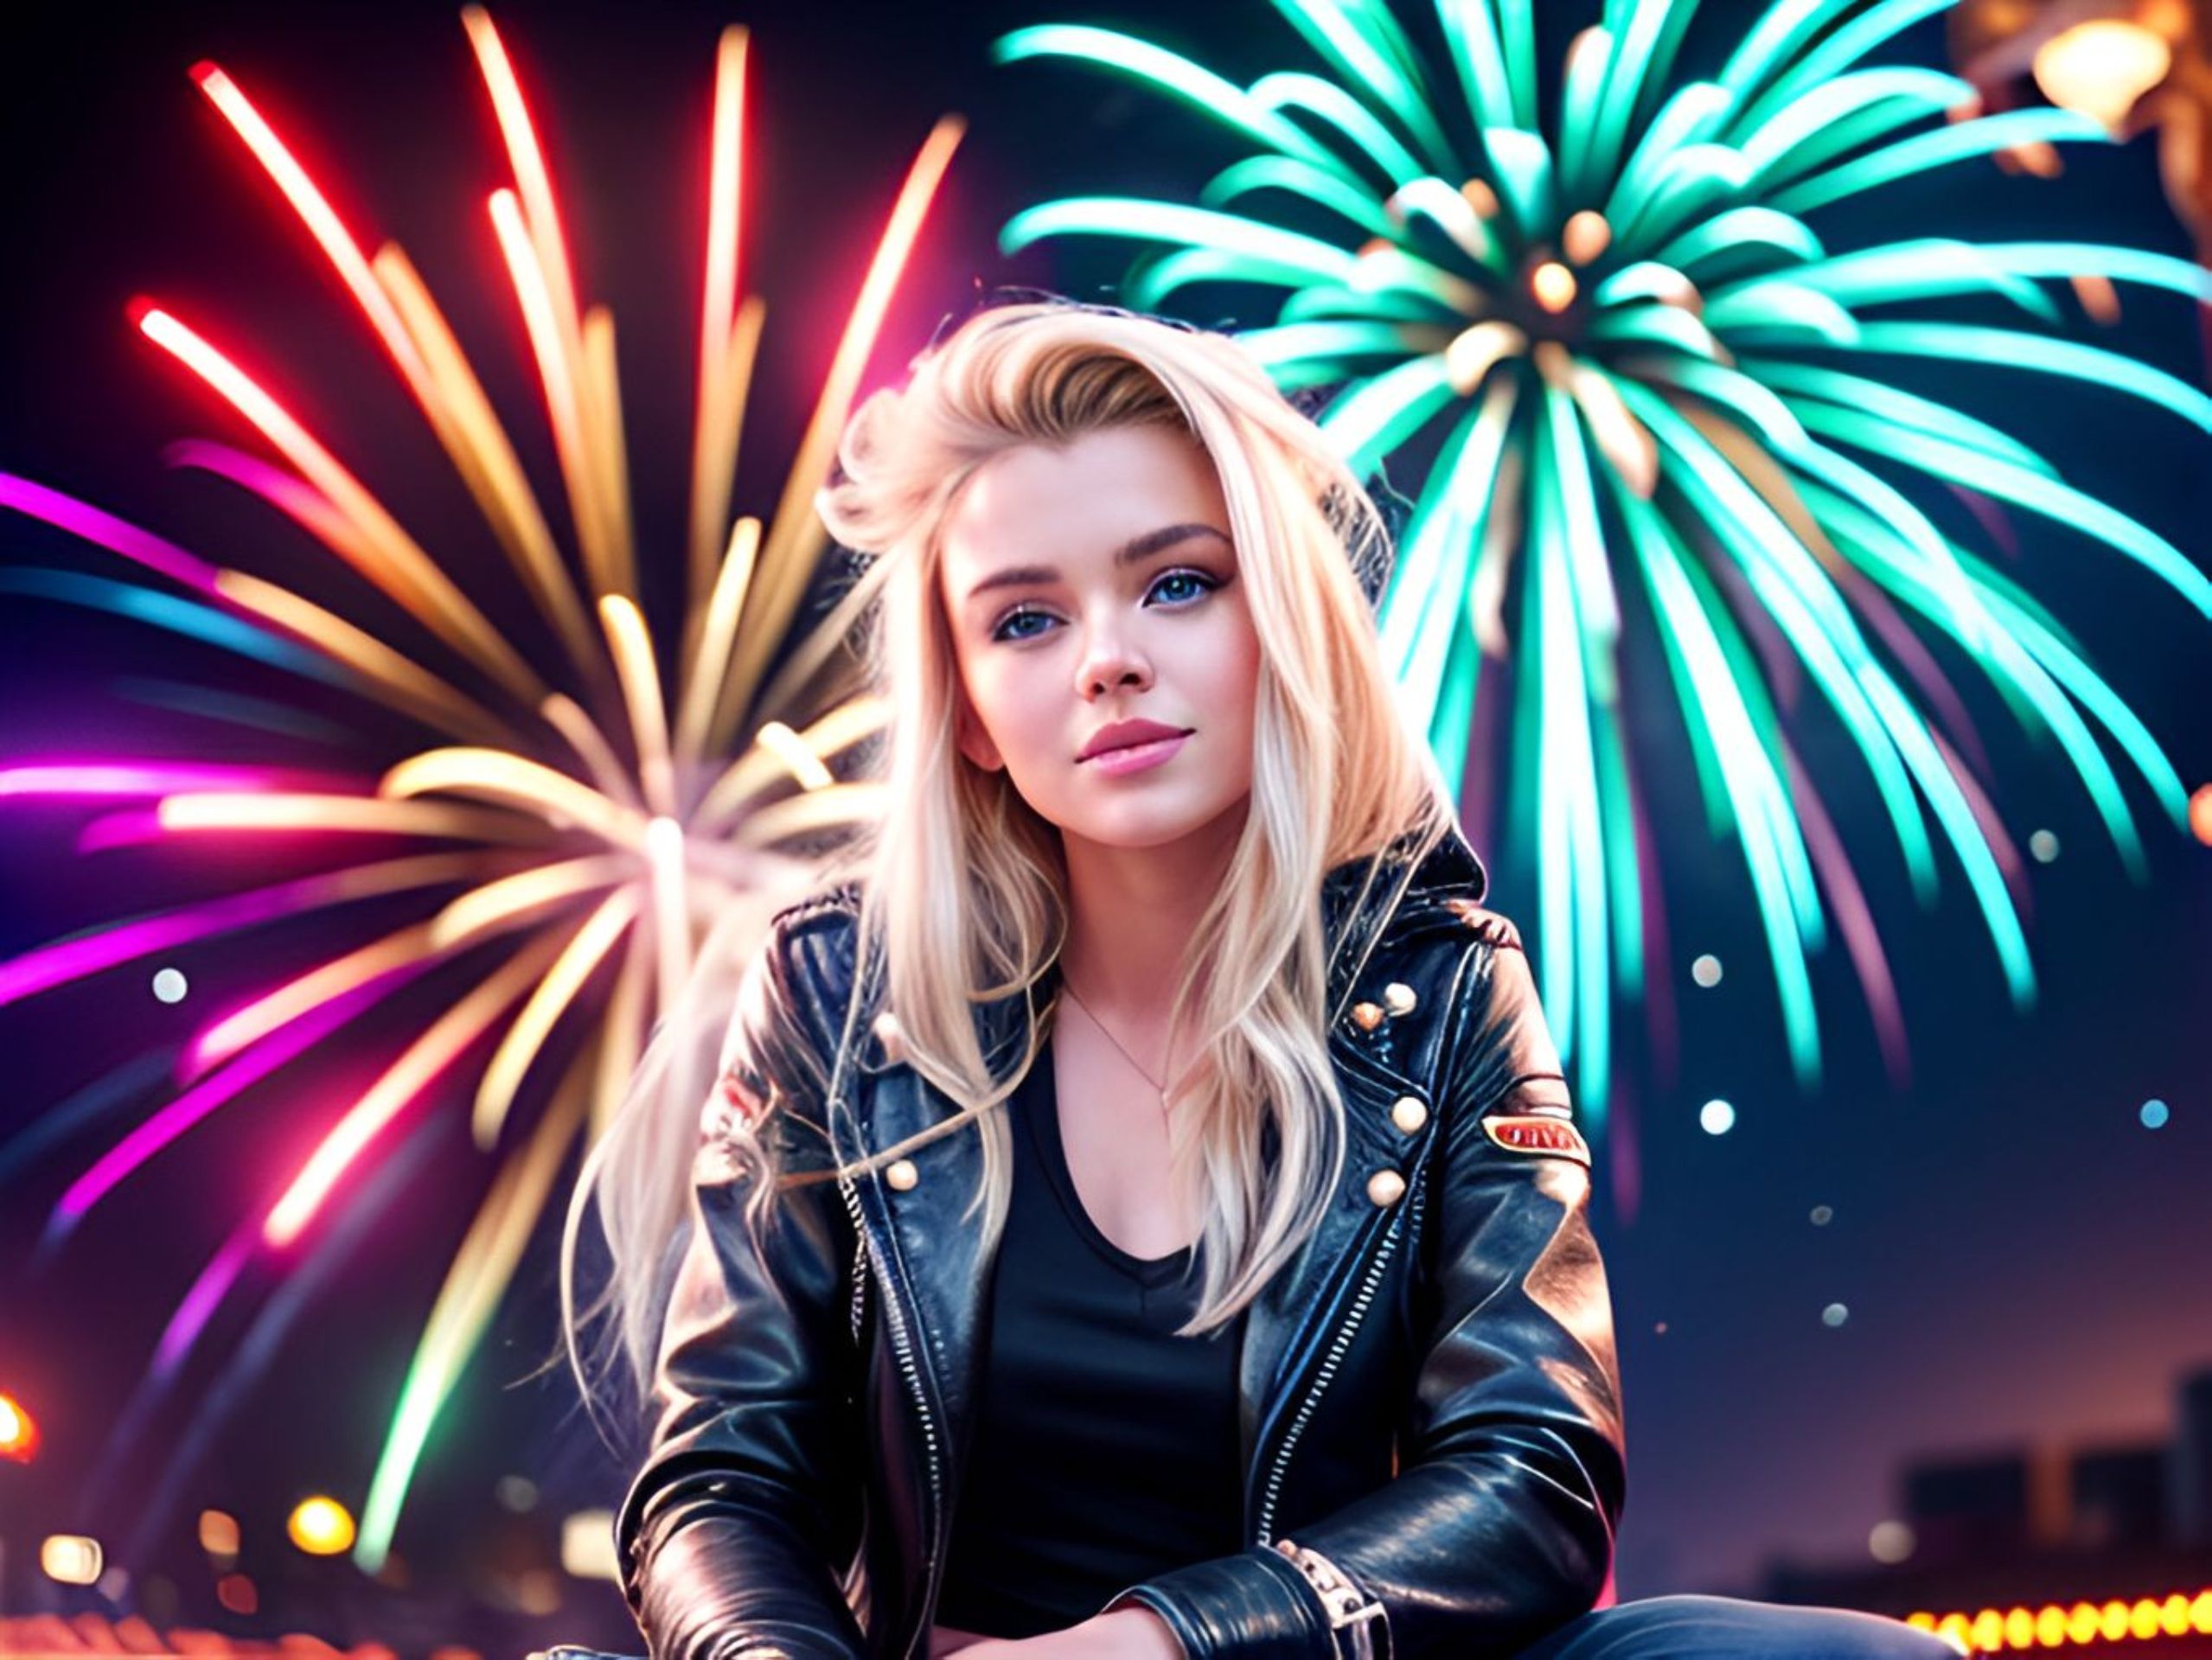 Free photo Beautiful blonde, in leather jacket, in front of fireworks, photo